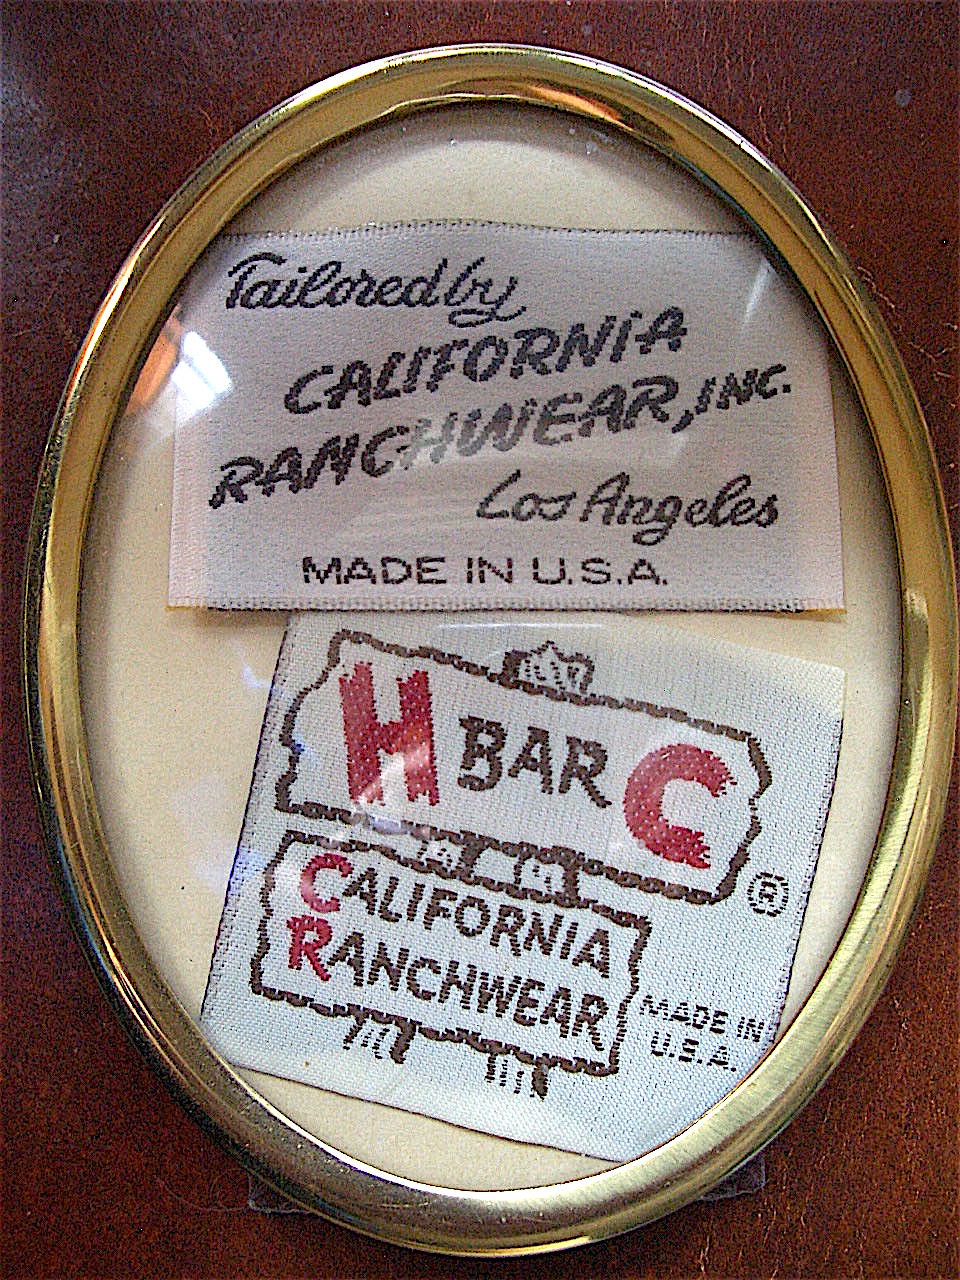 H-Bar-C labels - Tailored by California Ranchwear, Inc. Los Angeles, Made in U.S.A.